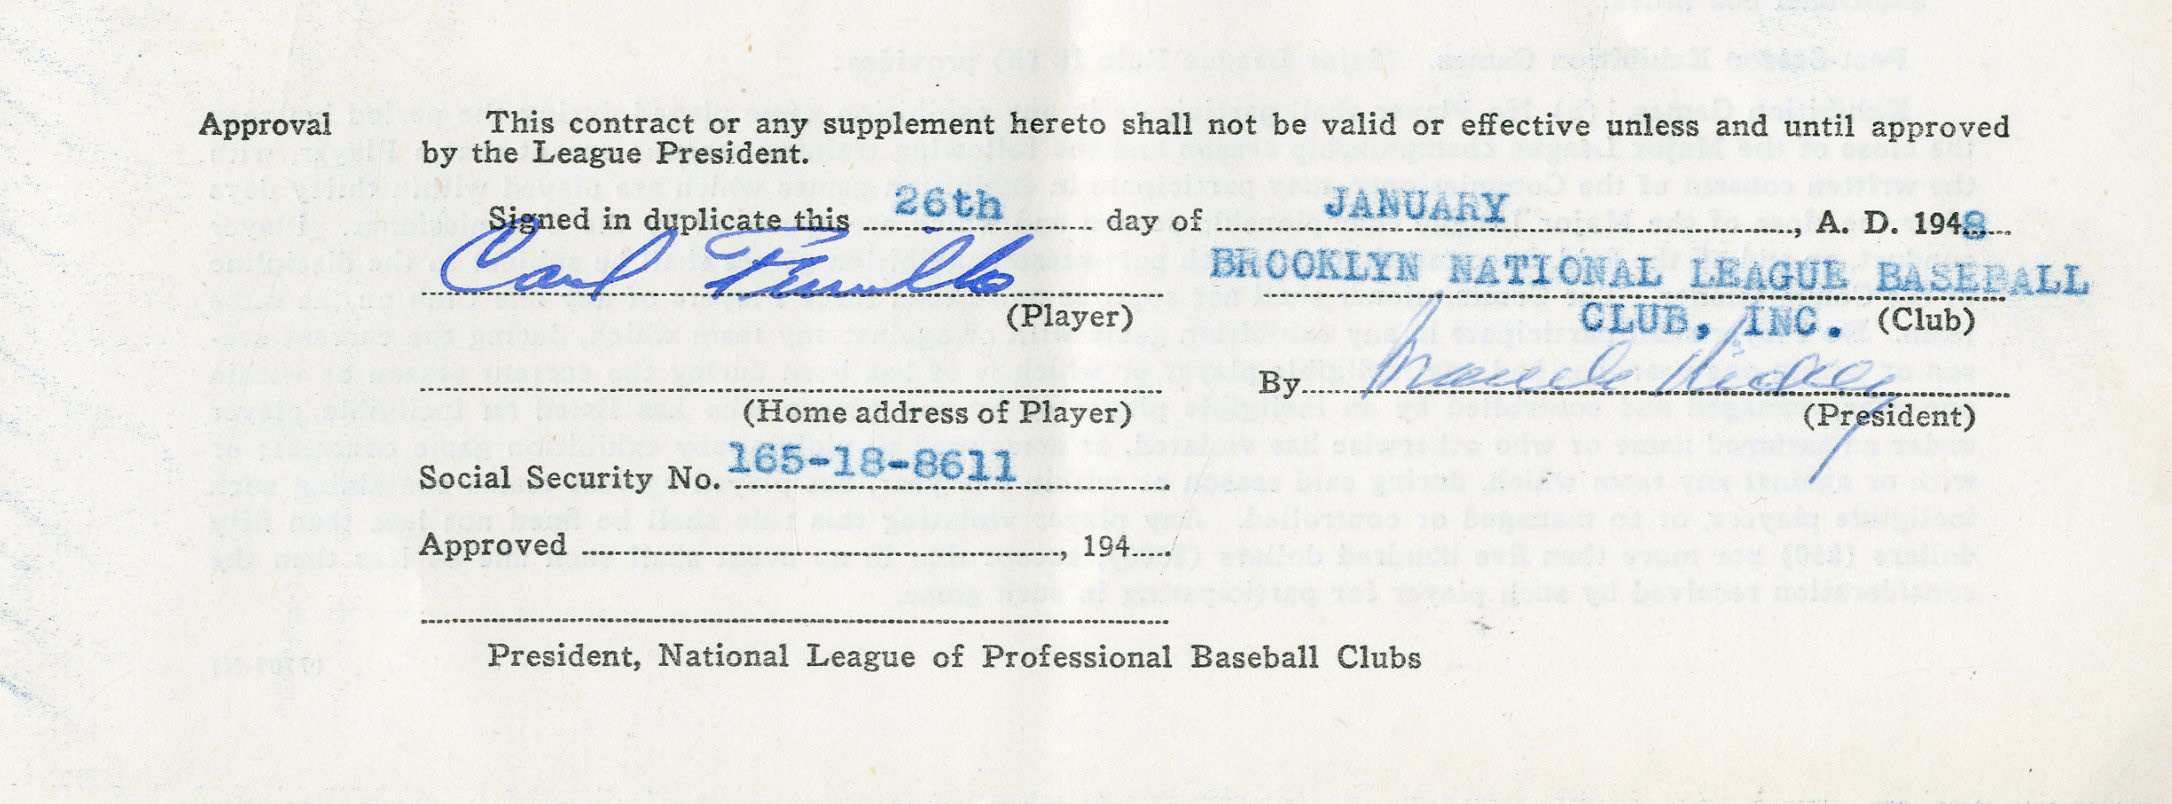 Jackie Robinson & Brooklyn Dodgers - 1948 Carl Furillo Brooklyn Dodgers Signed Contract